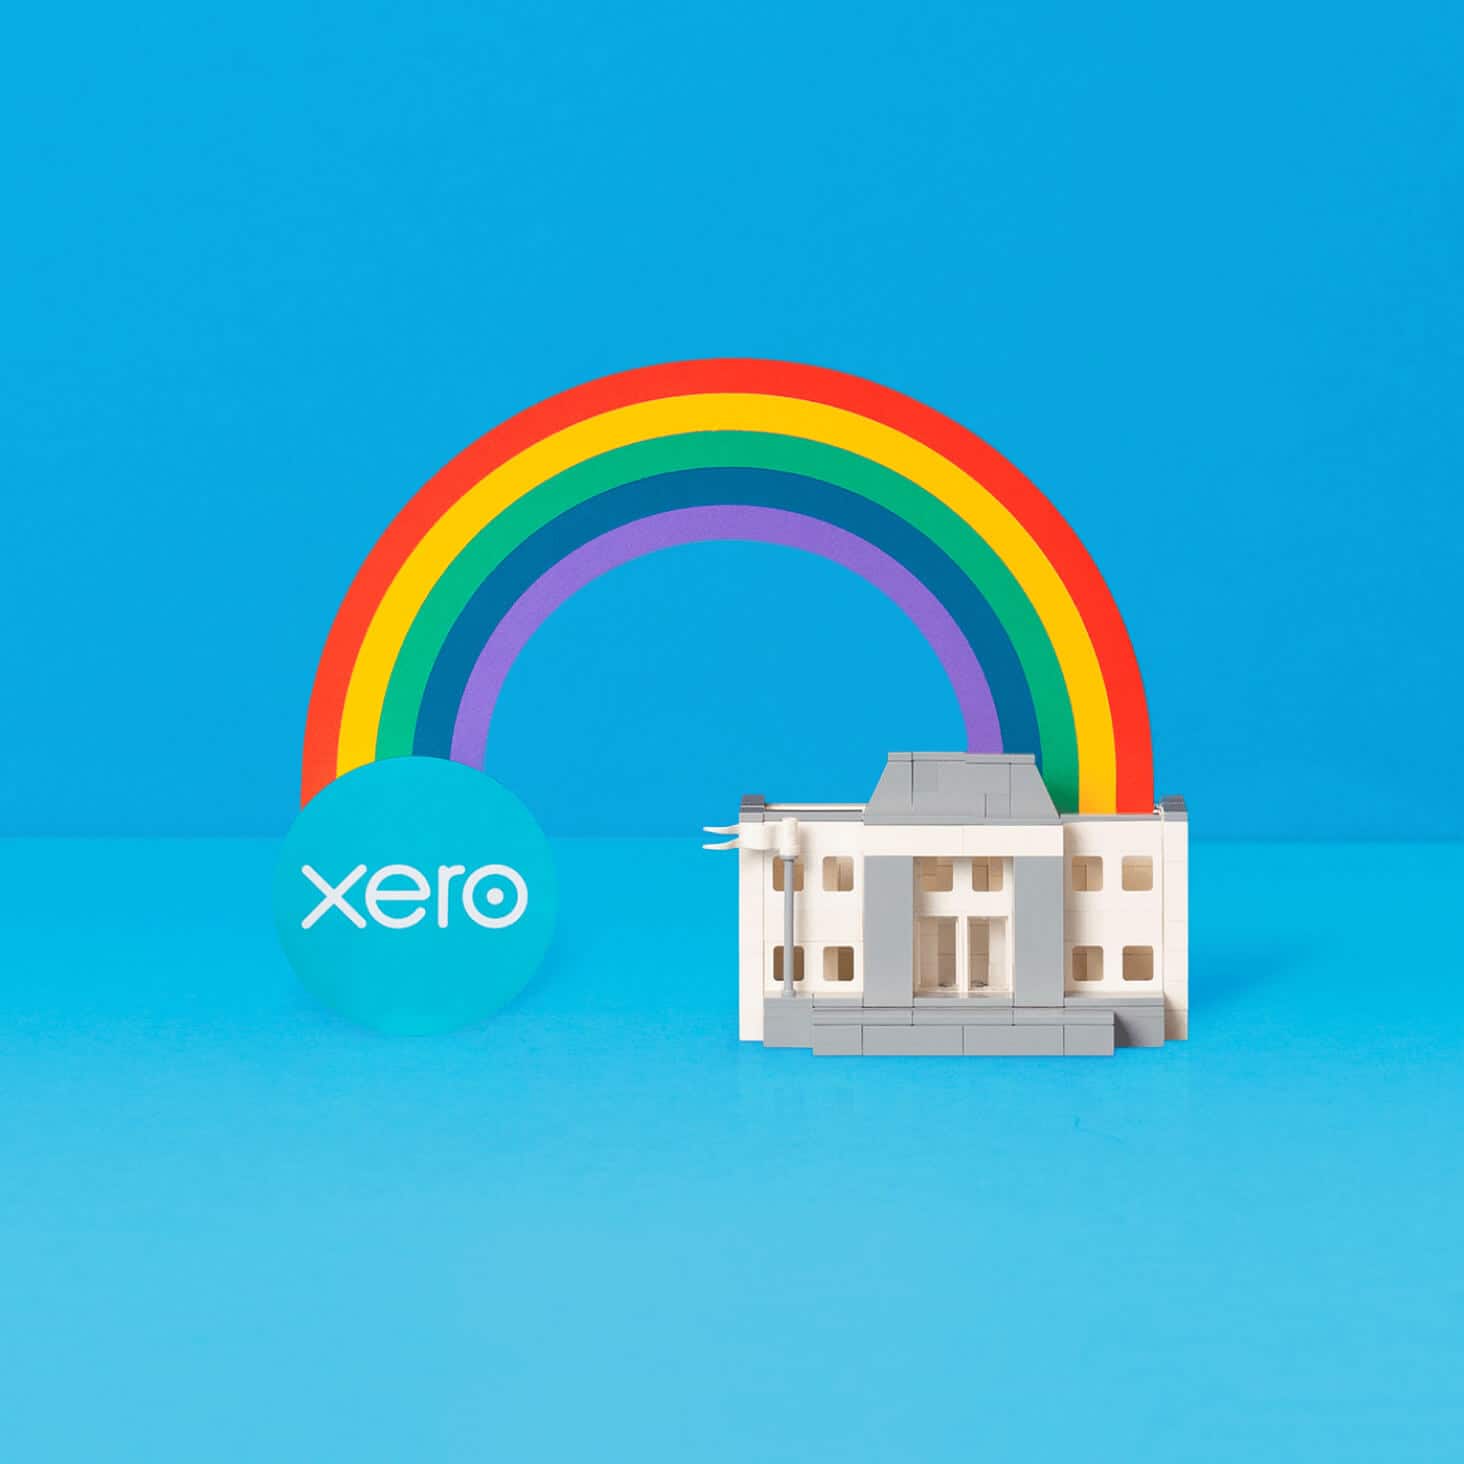 Xero logo connected to a bank by a rainbow 